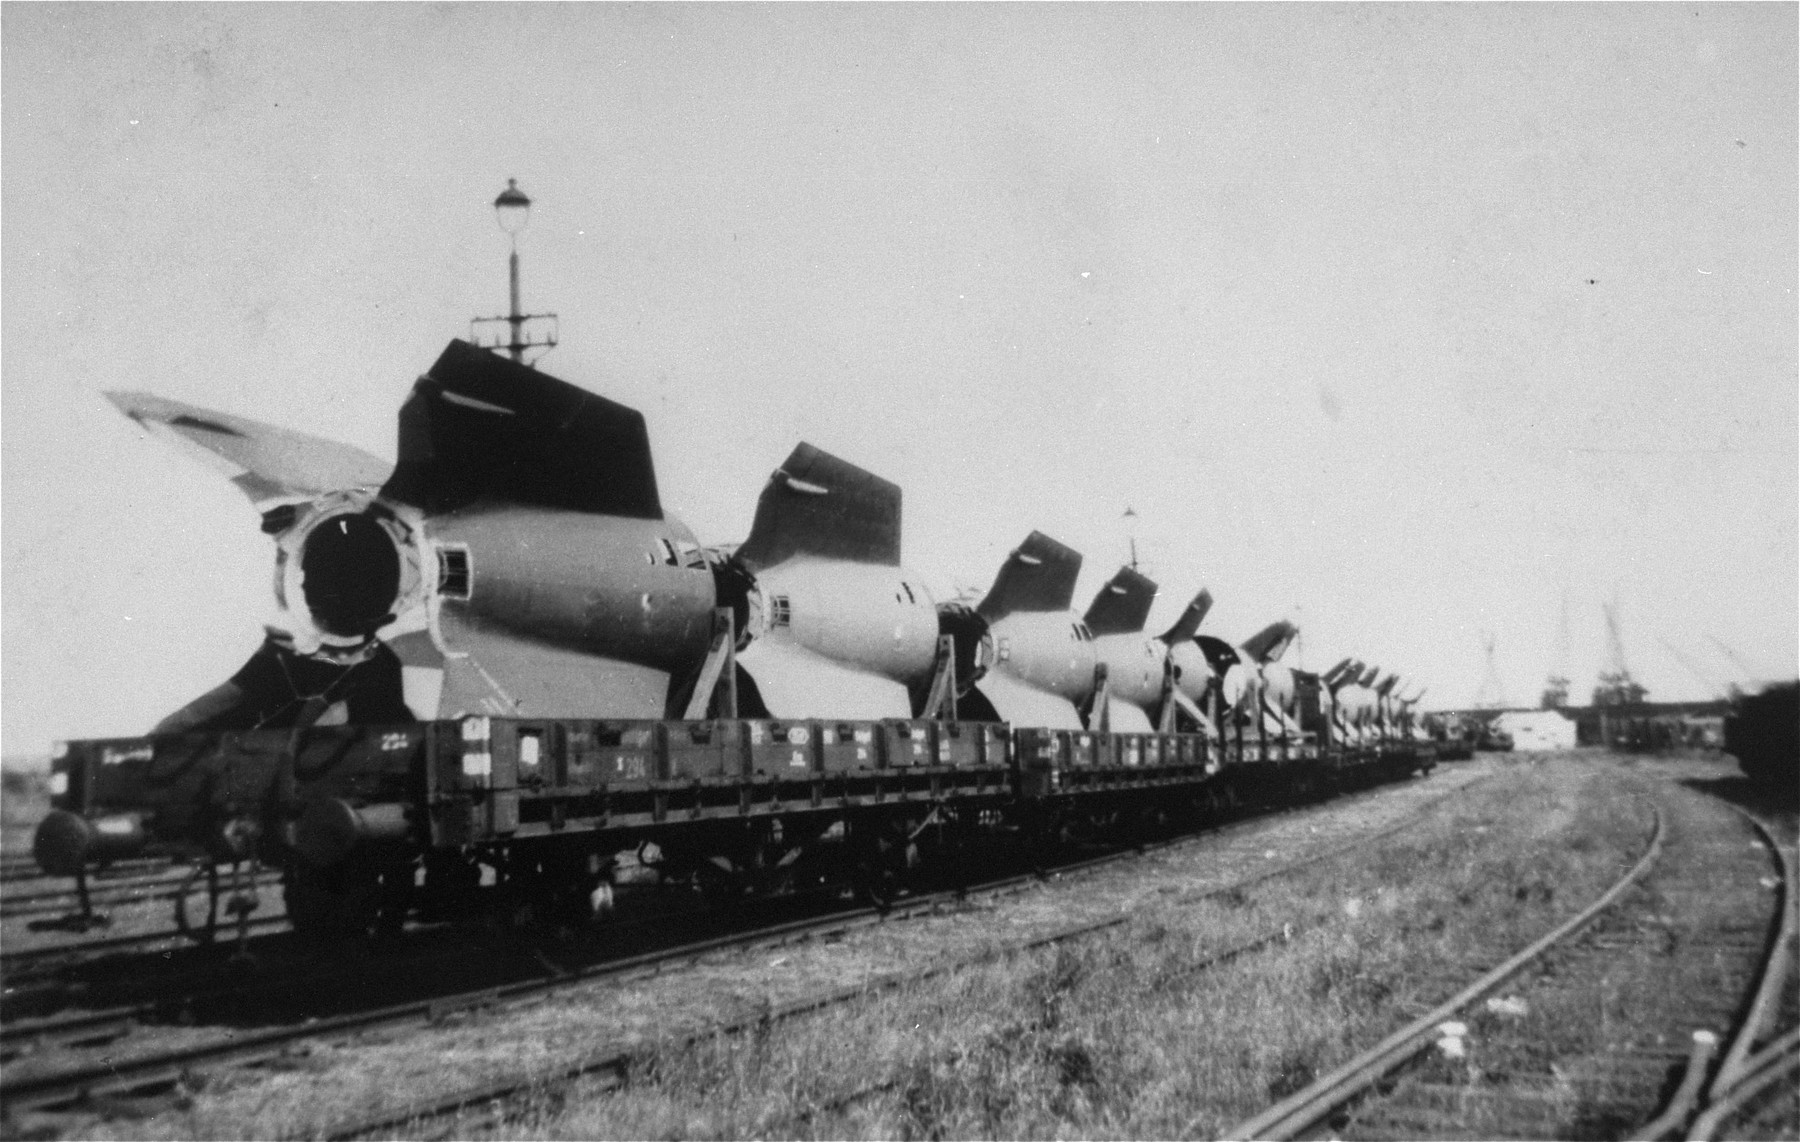 V-2 rocket tail fins manufactured at Dora-Mittelbau, are sent by rail to Antwerp, where they will be trans-shipped to the United States.